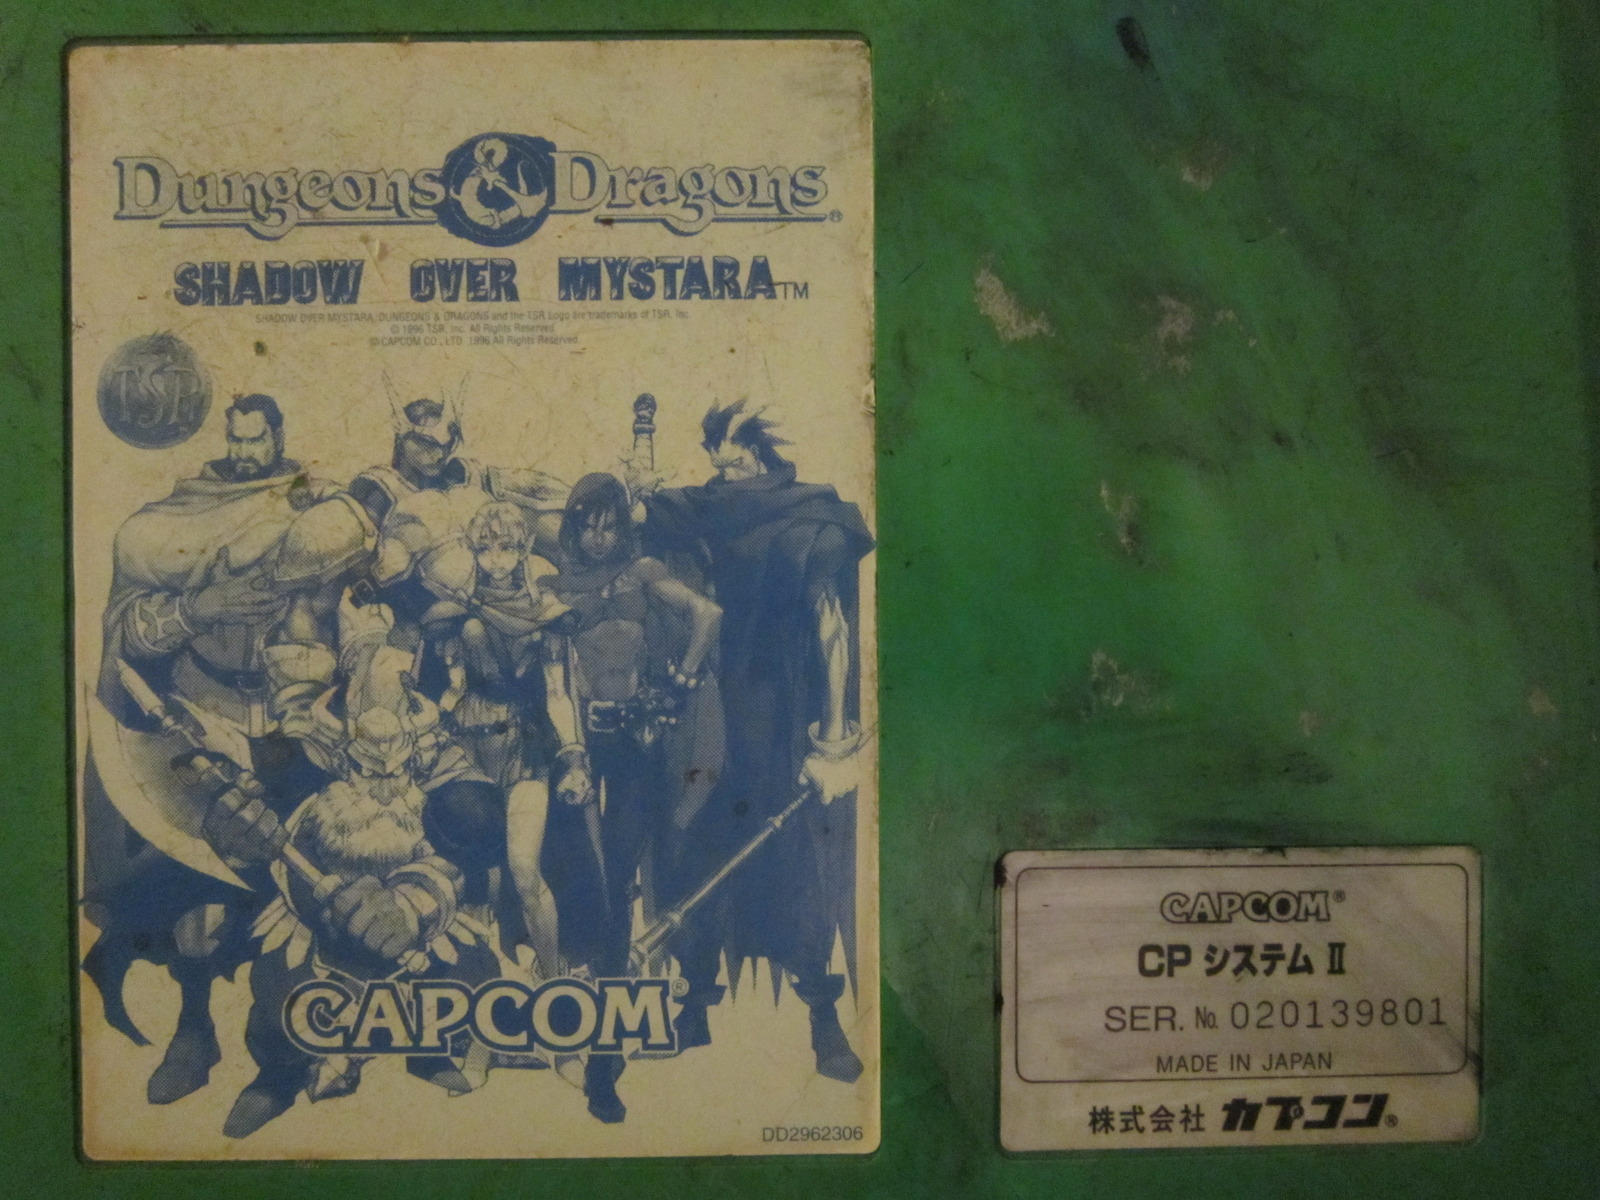 Cps2 dungeons and dragons shadow over mystara bootleg1 label.jpg